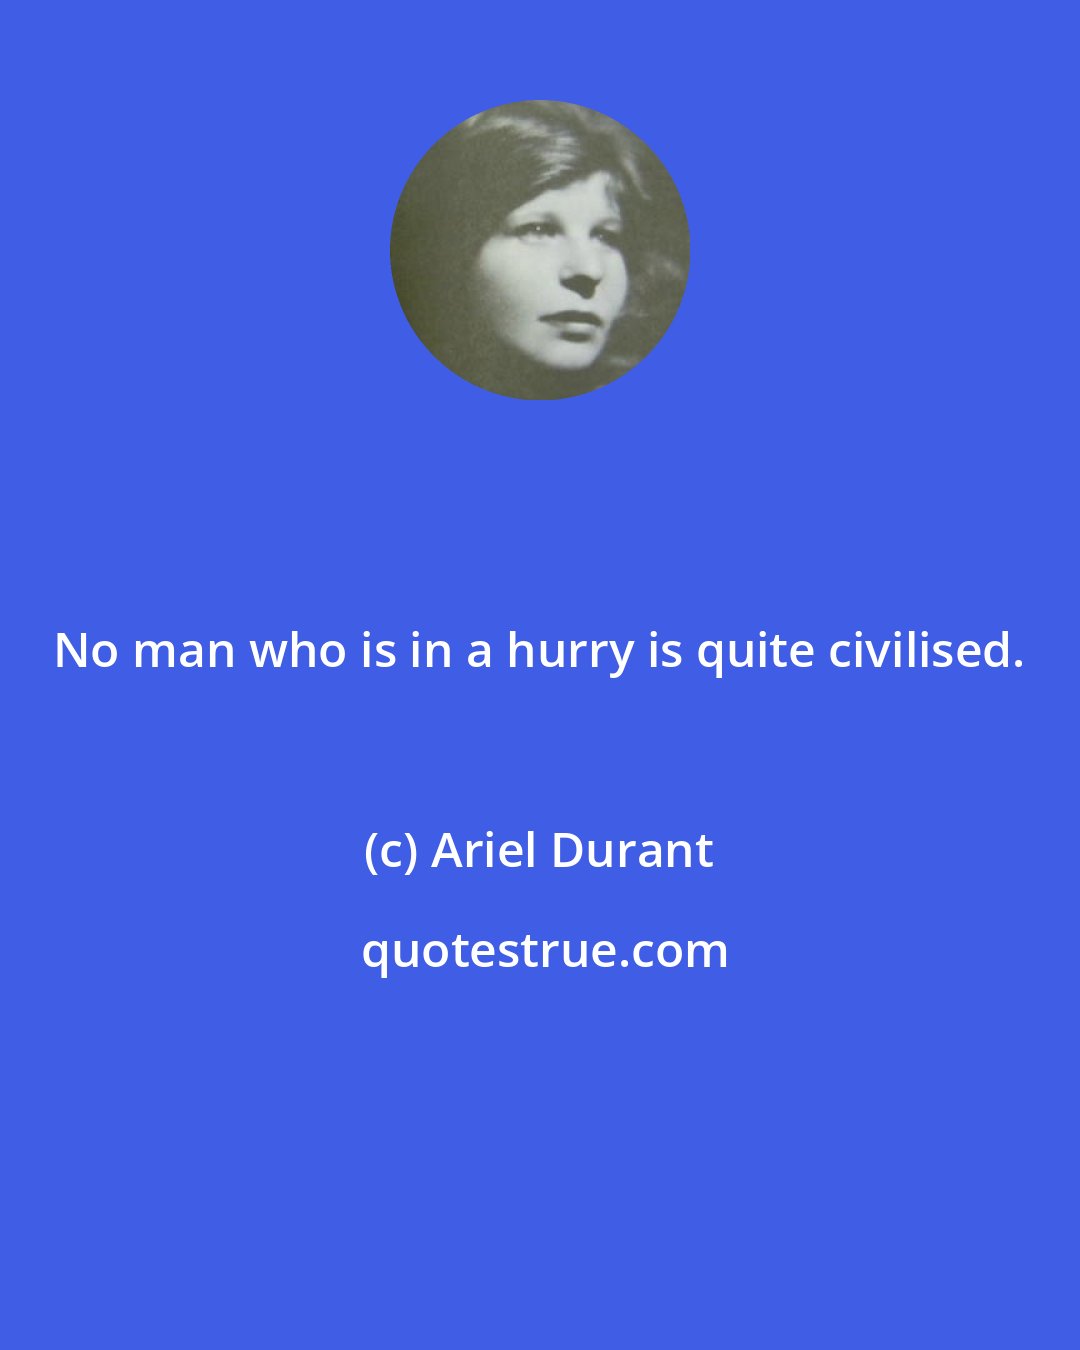 Ariel Durant: No man who is in a hurry is quite civilised.